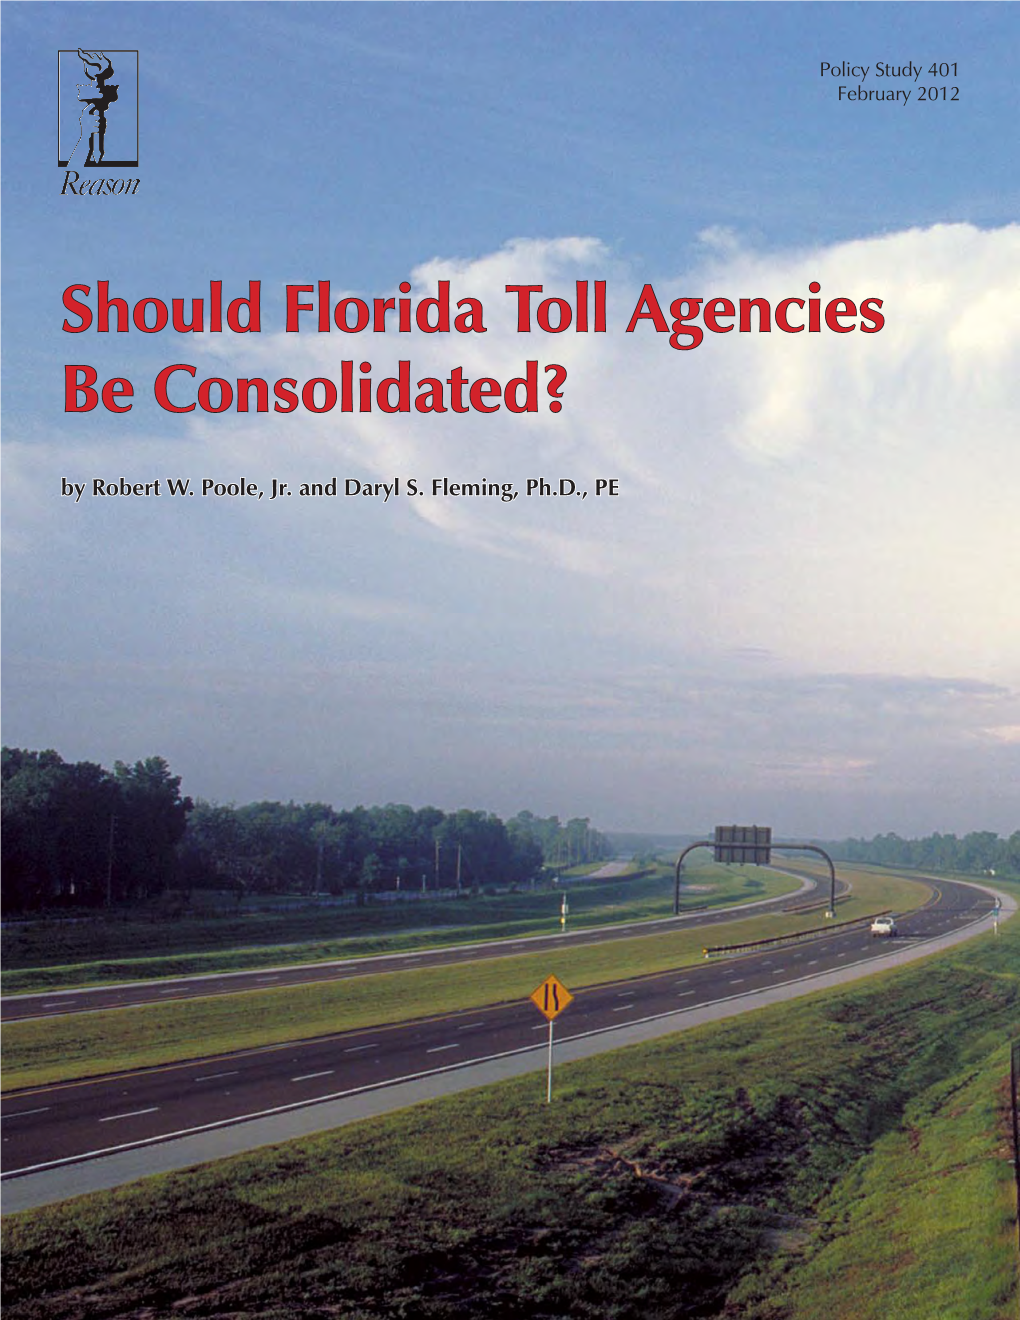 Should Florida Toll Agencies Be Consolidated? by Robert W